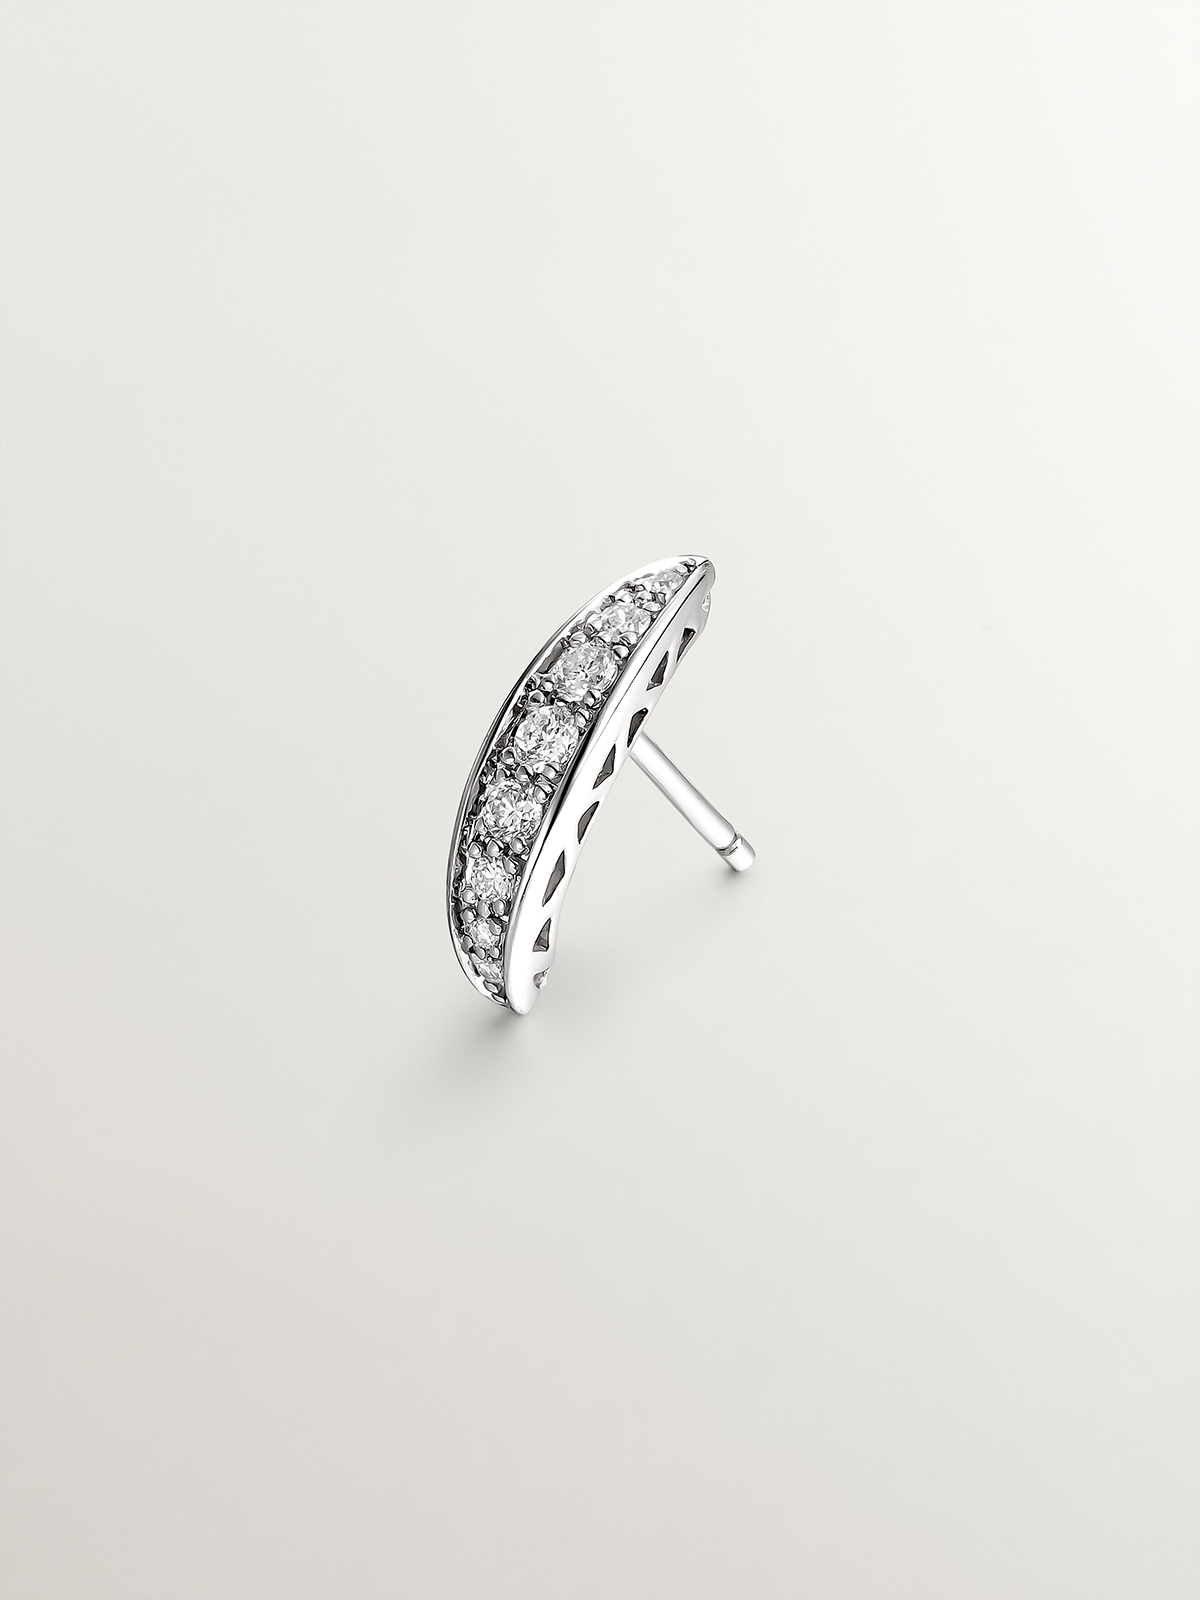 Individual 18K white gold earring with brilliant-cut diamonds